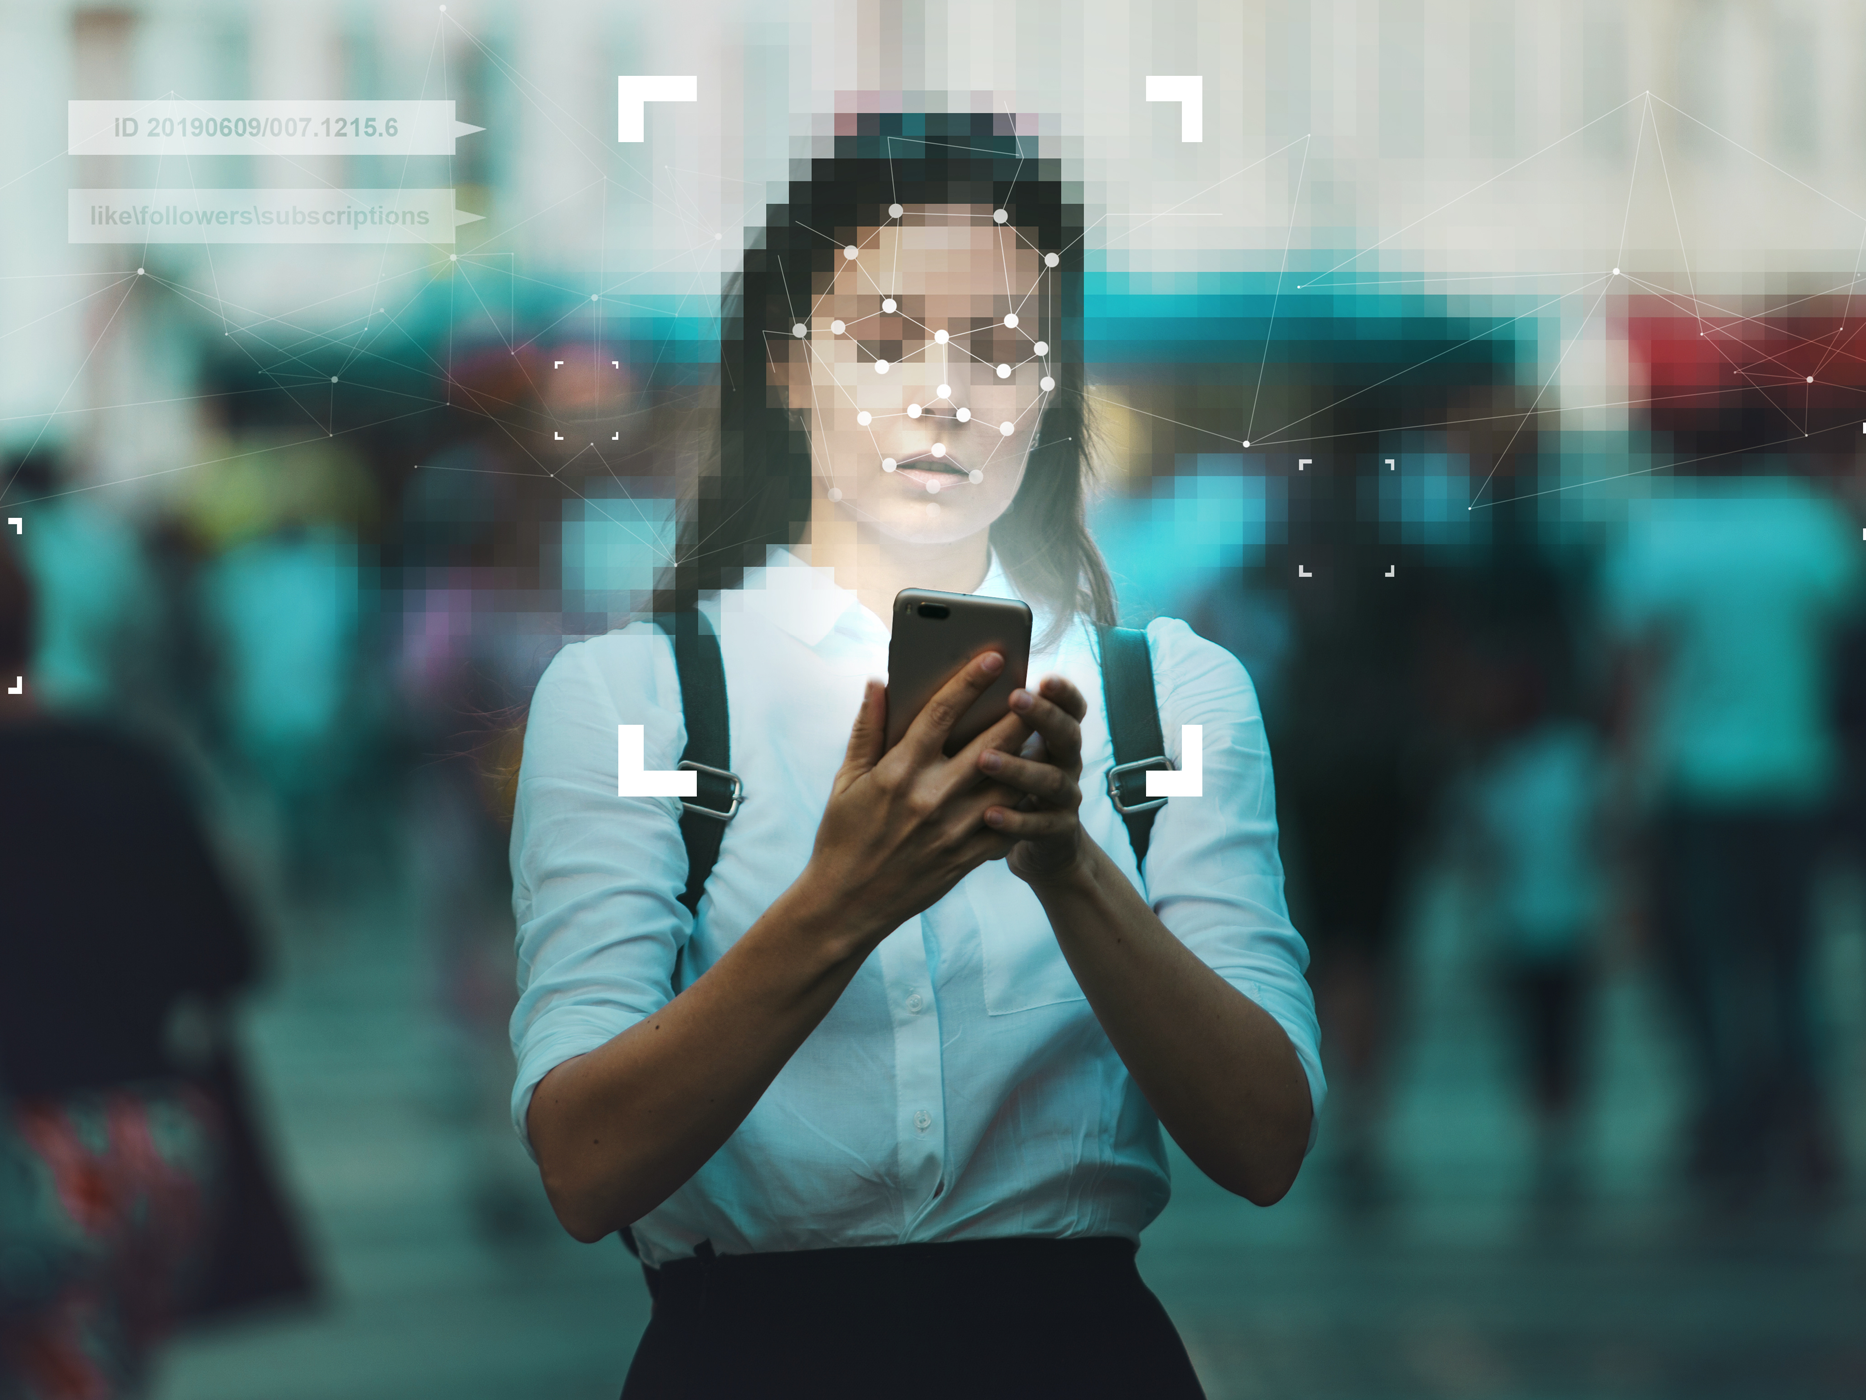 Deepfakes expose vulnerabilities in certain facial recognition technology